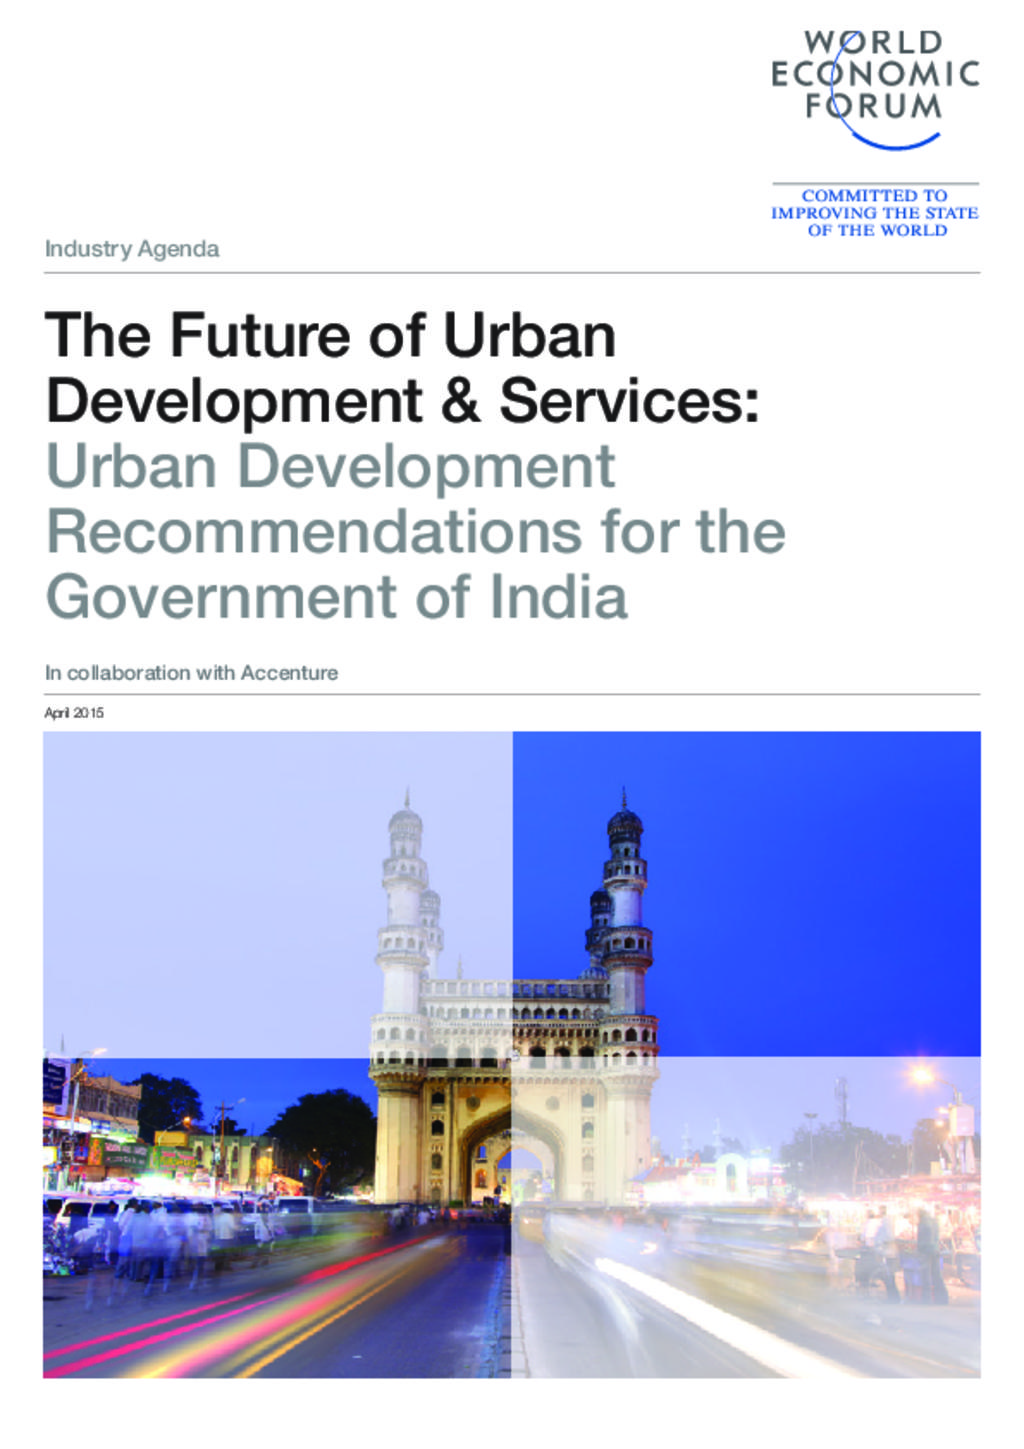 The Future of Urban Development & Services: Urban Development Recommendations for the Government of India